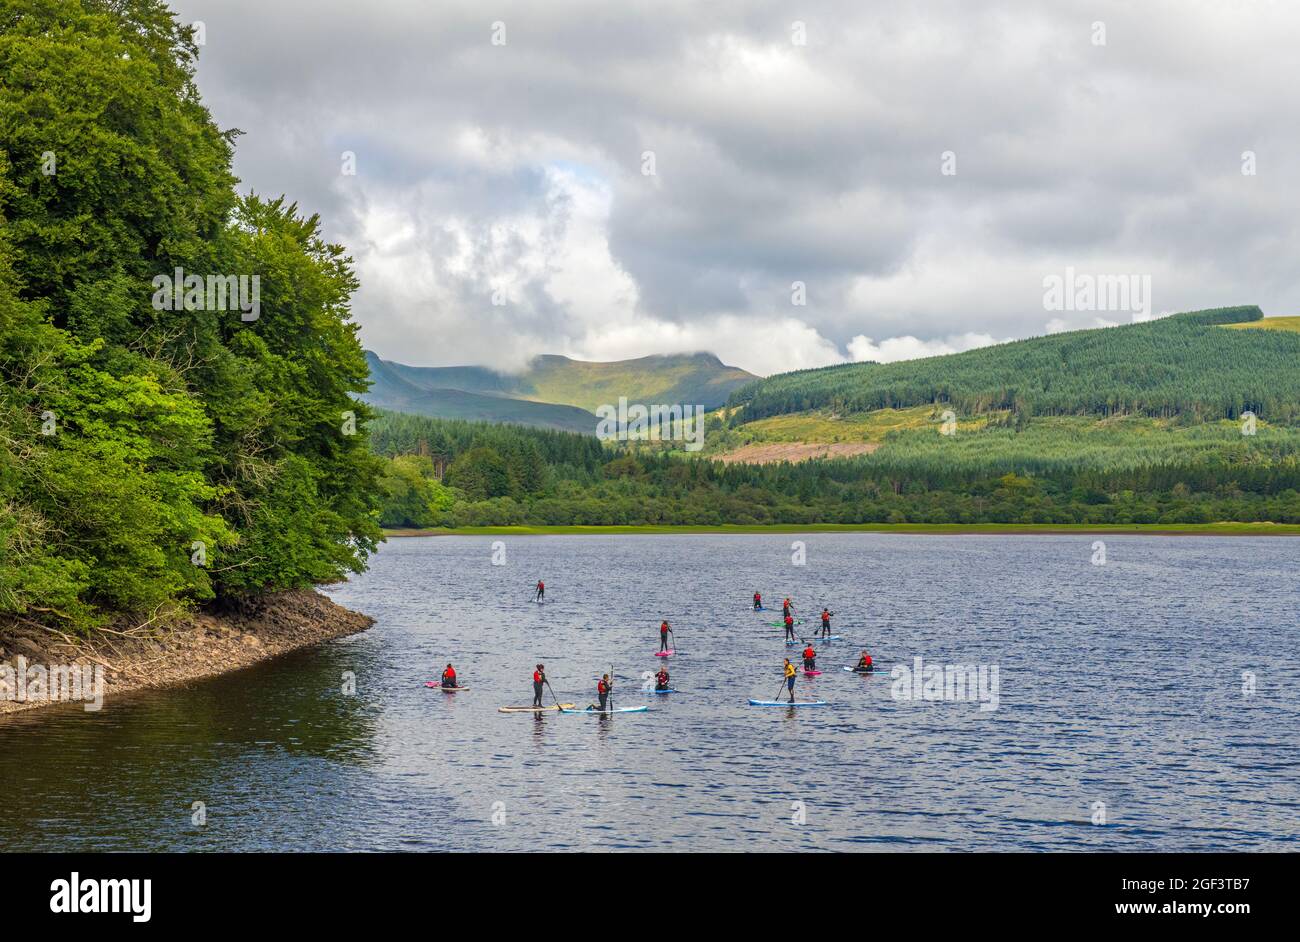 People learning to paddle board on Prntwyn Reservoir in the central Brecon Beacons Wales Stock Photo